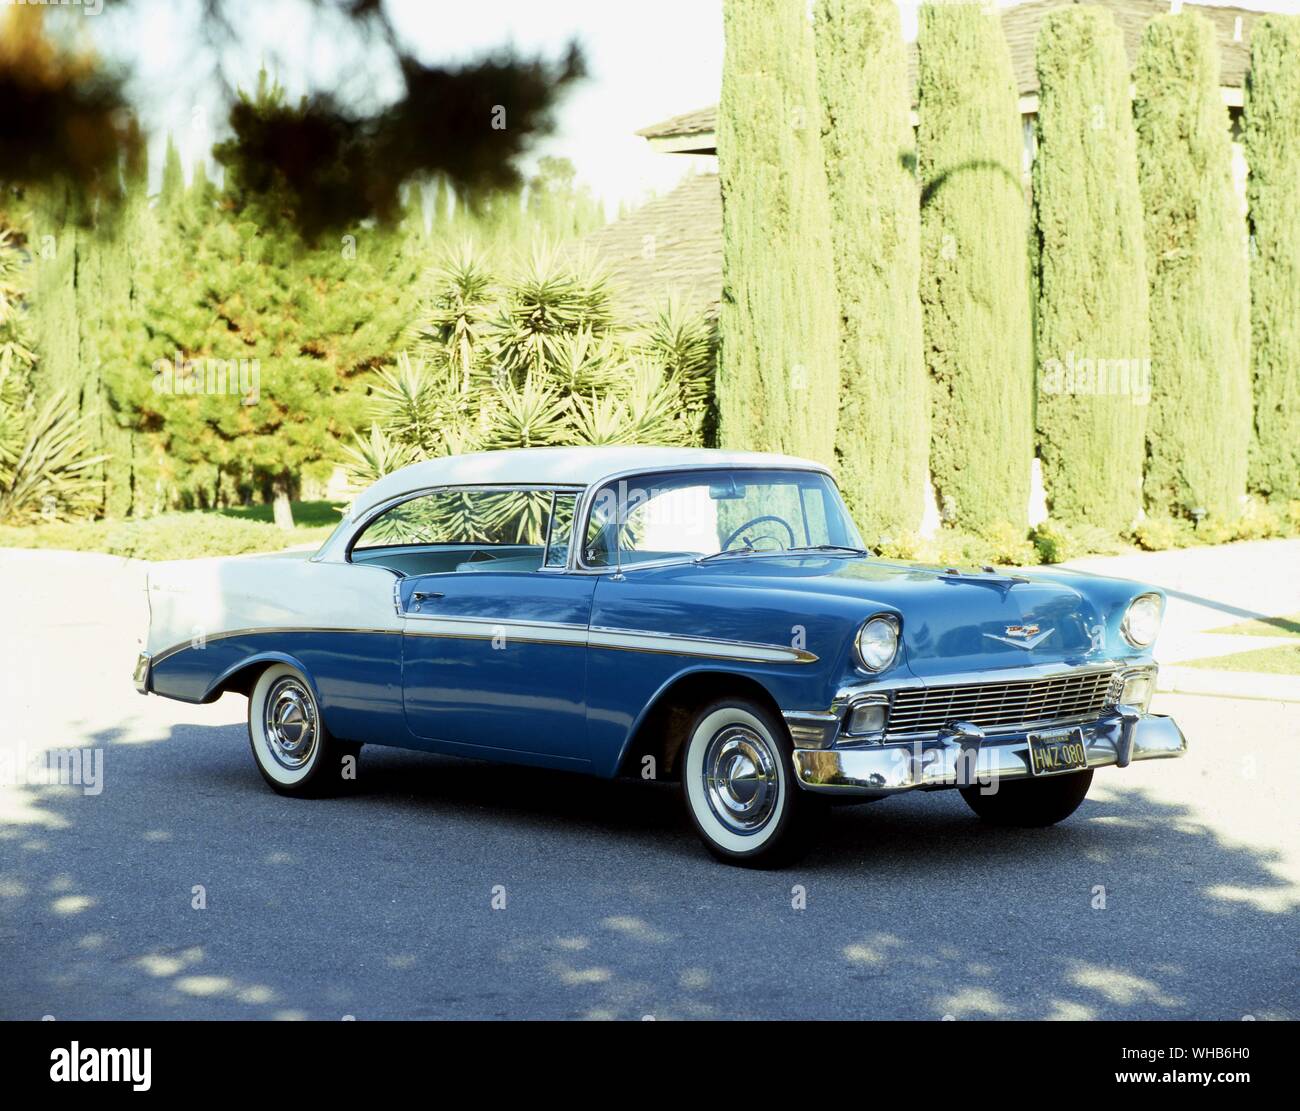 Transports Transport routier 1956. Chrysler New Yorker Deluxe Chevrolet Bel Air Banque D'Images